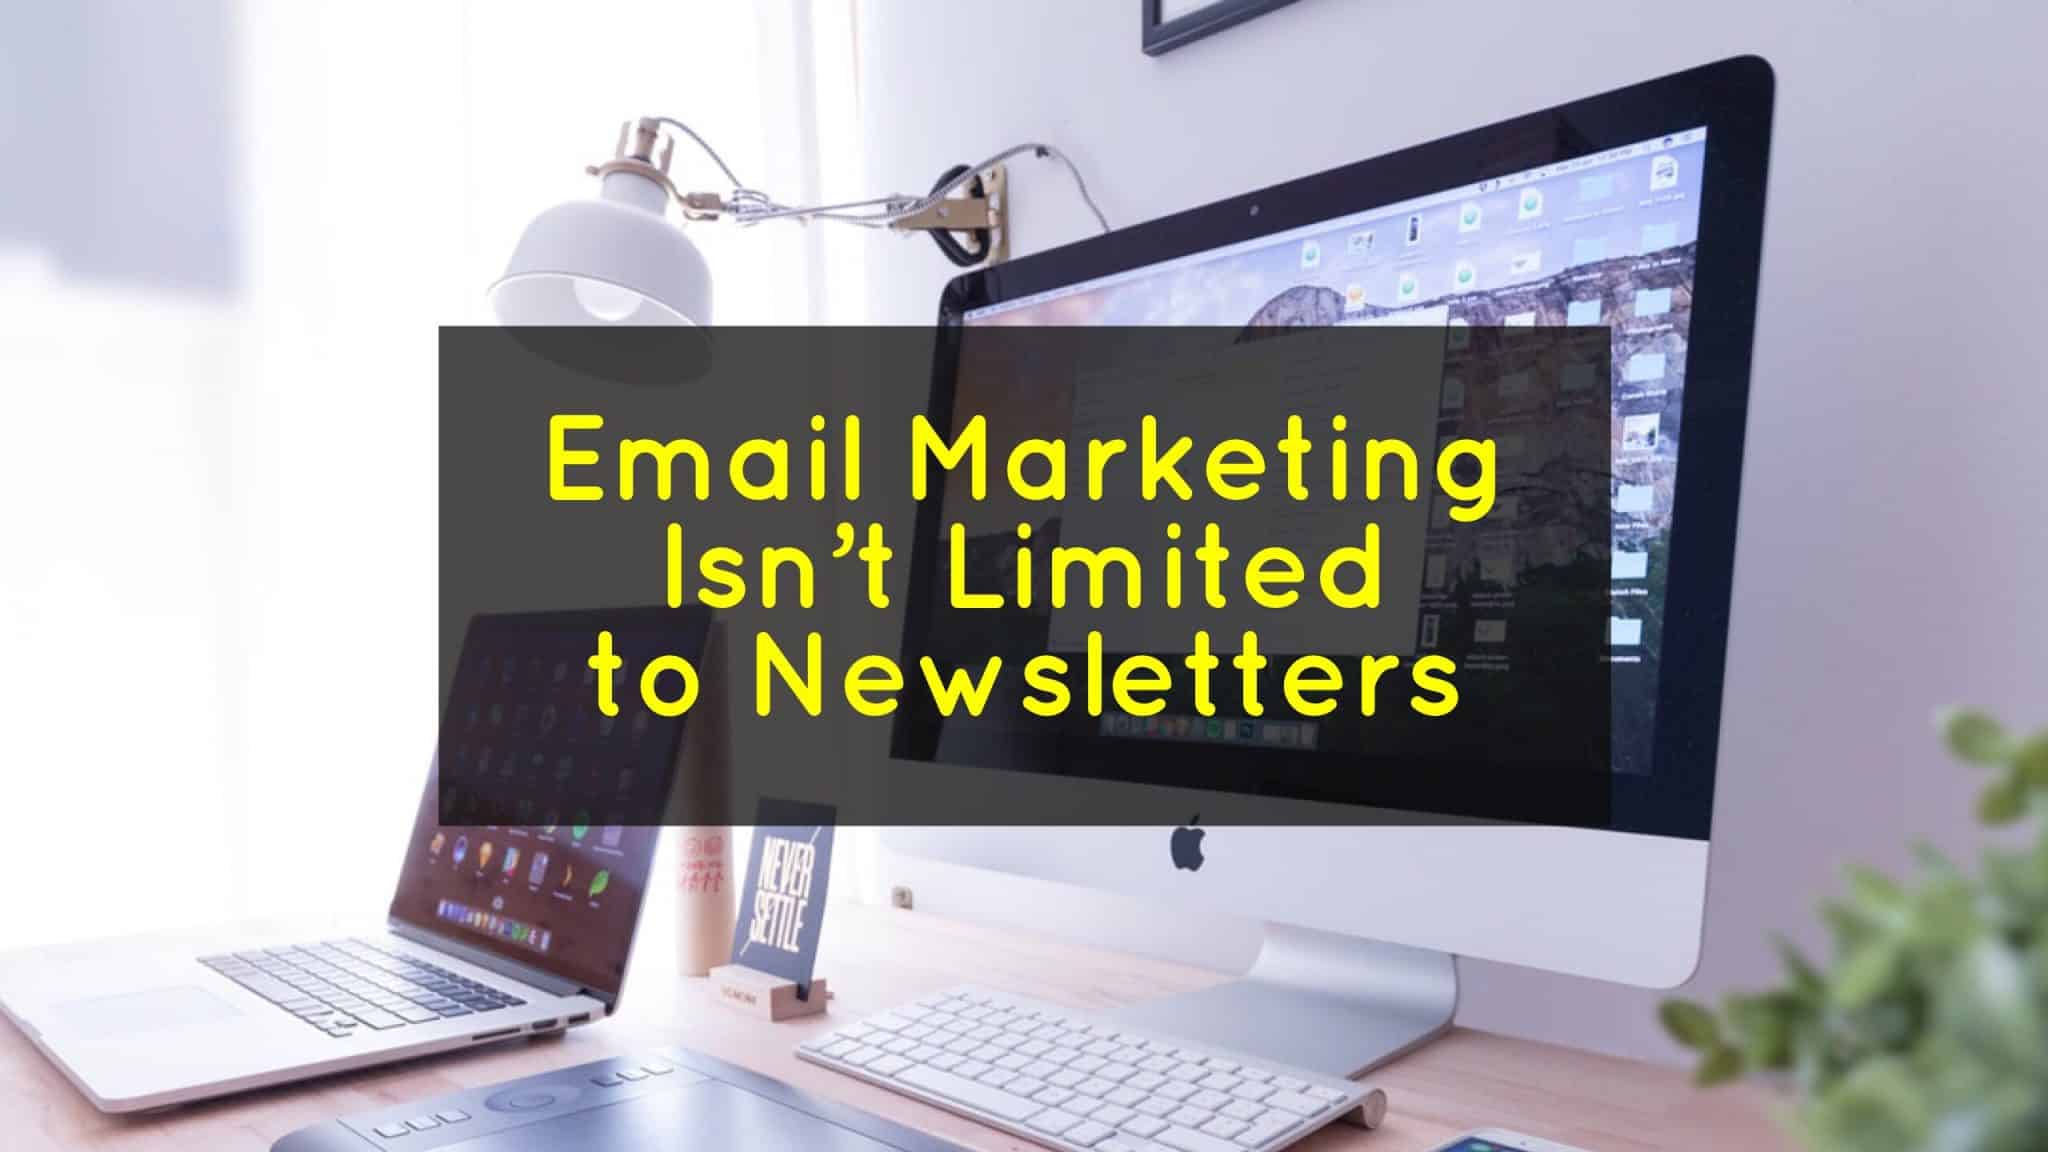 Email Marketing Isn't Limited to Newsletters